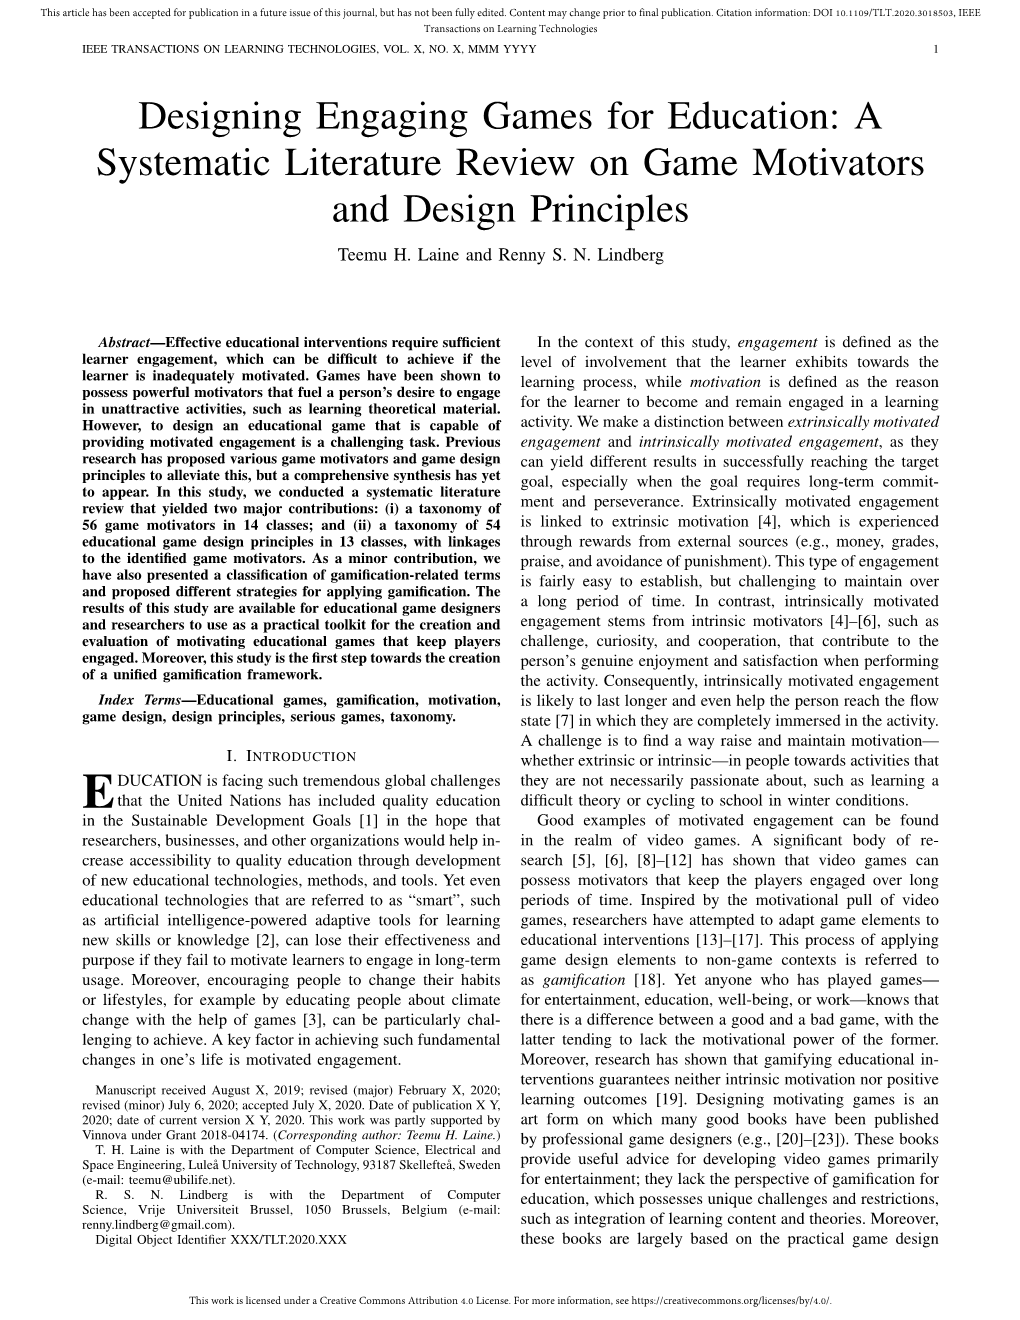 A Systematic Literature Review on Game Motivators and Design Principles Teemu H